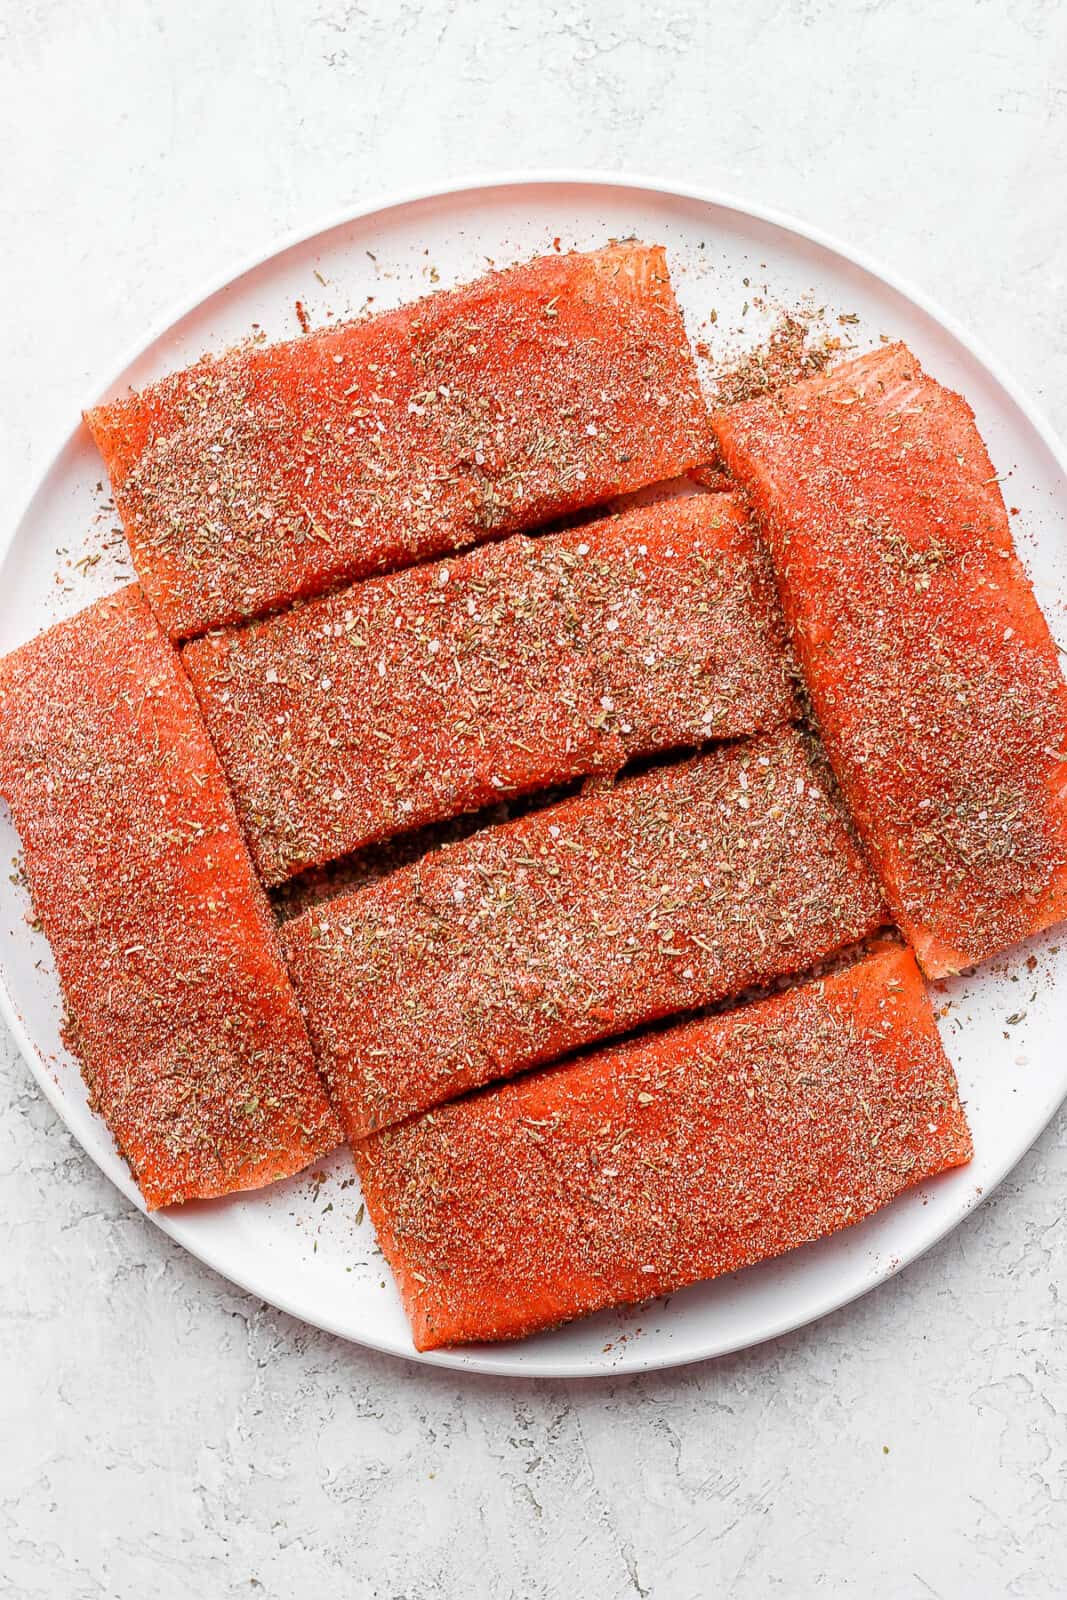 Salmon fillets covered with blackened seasoning.